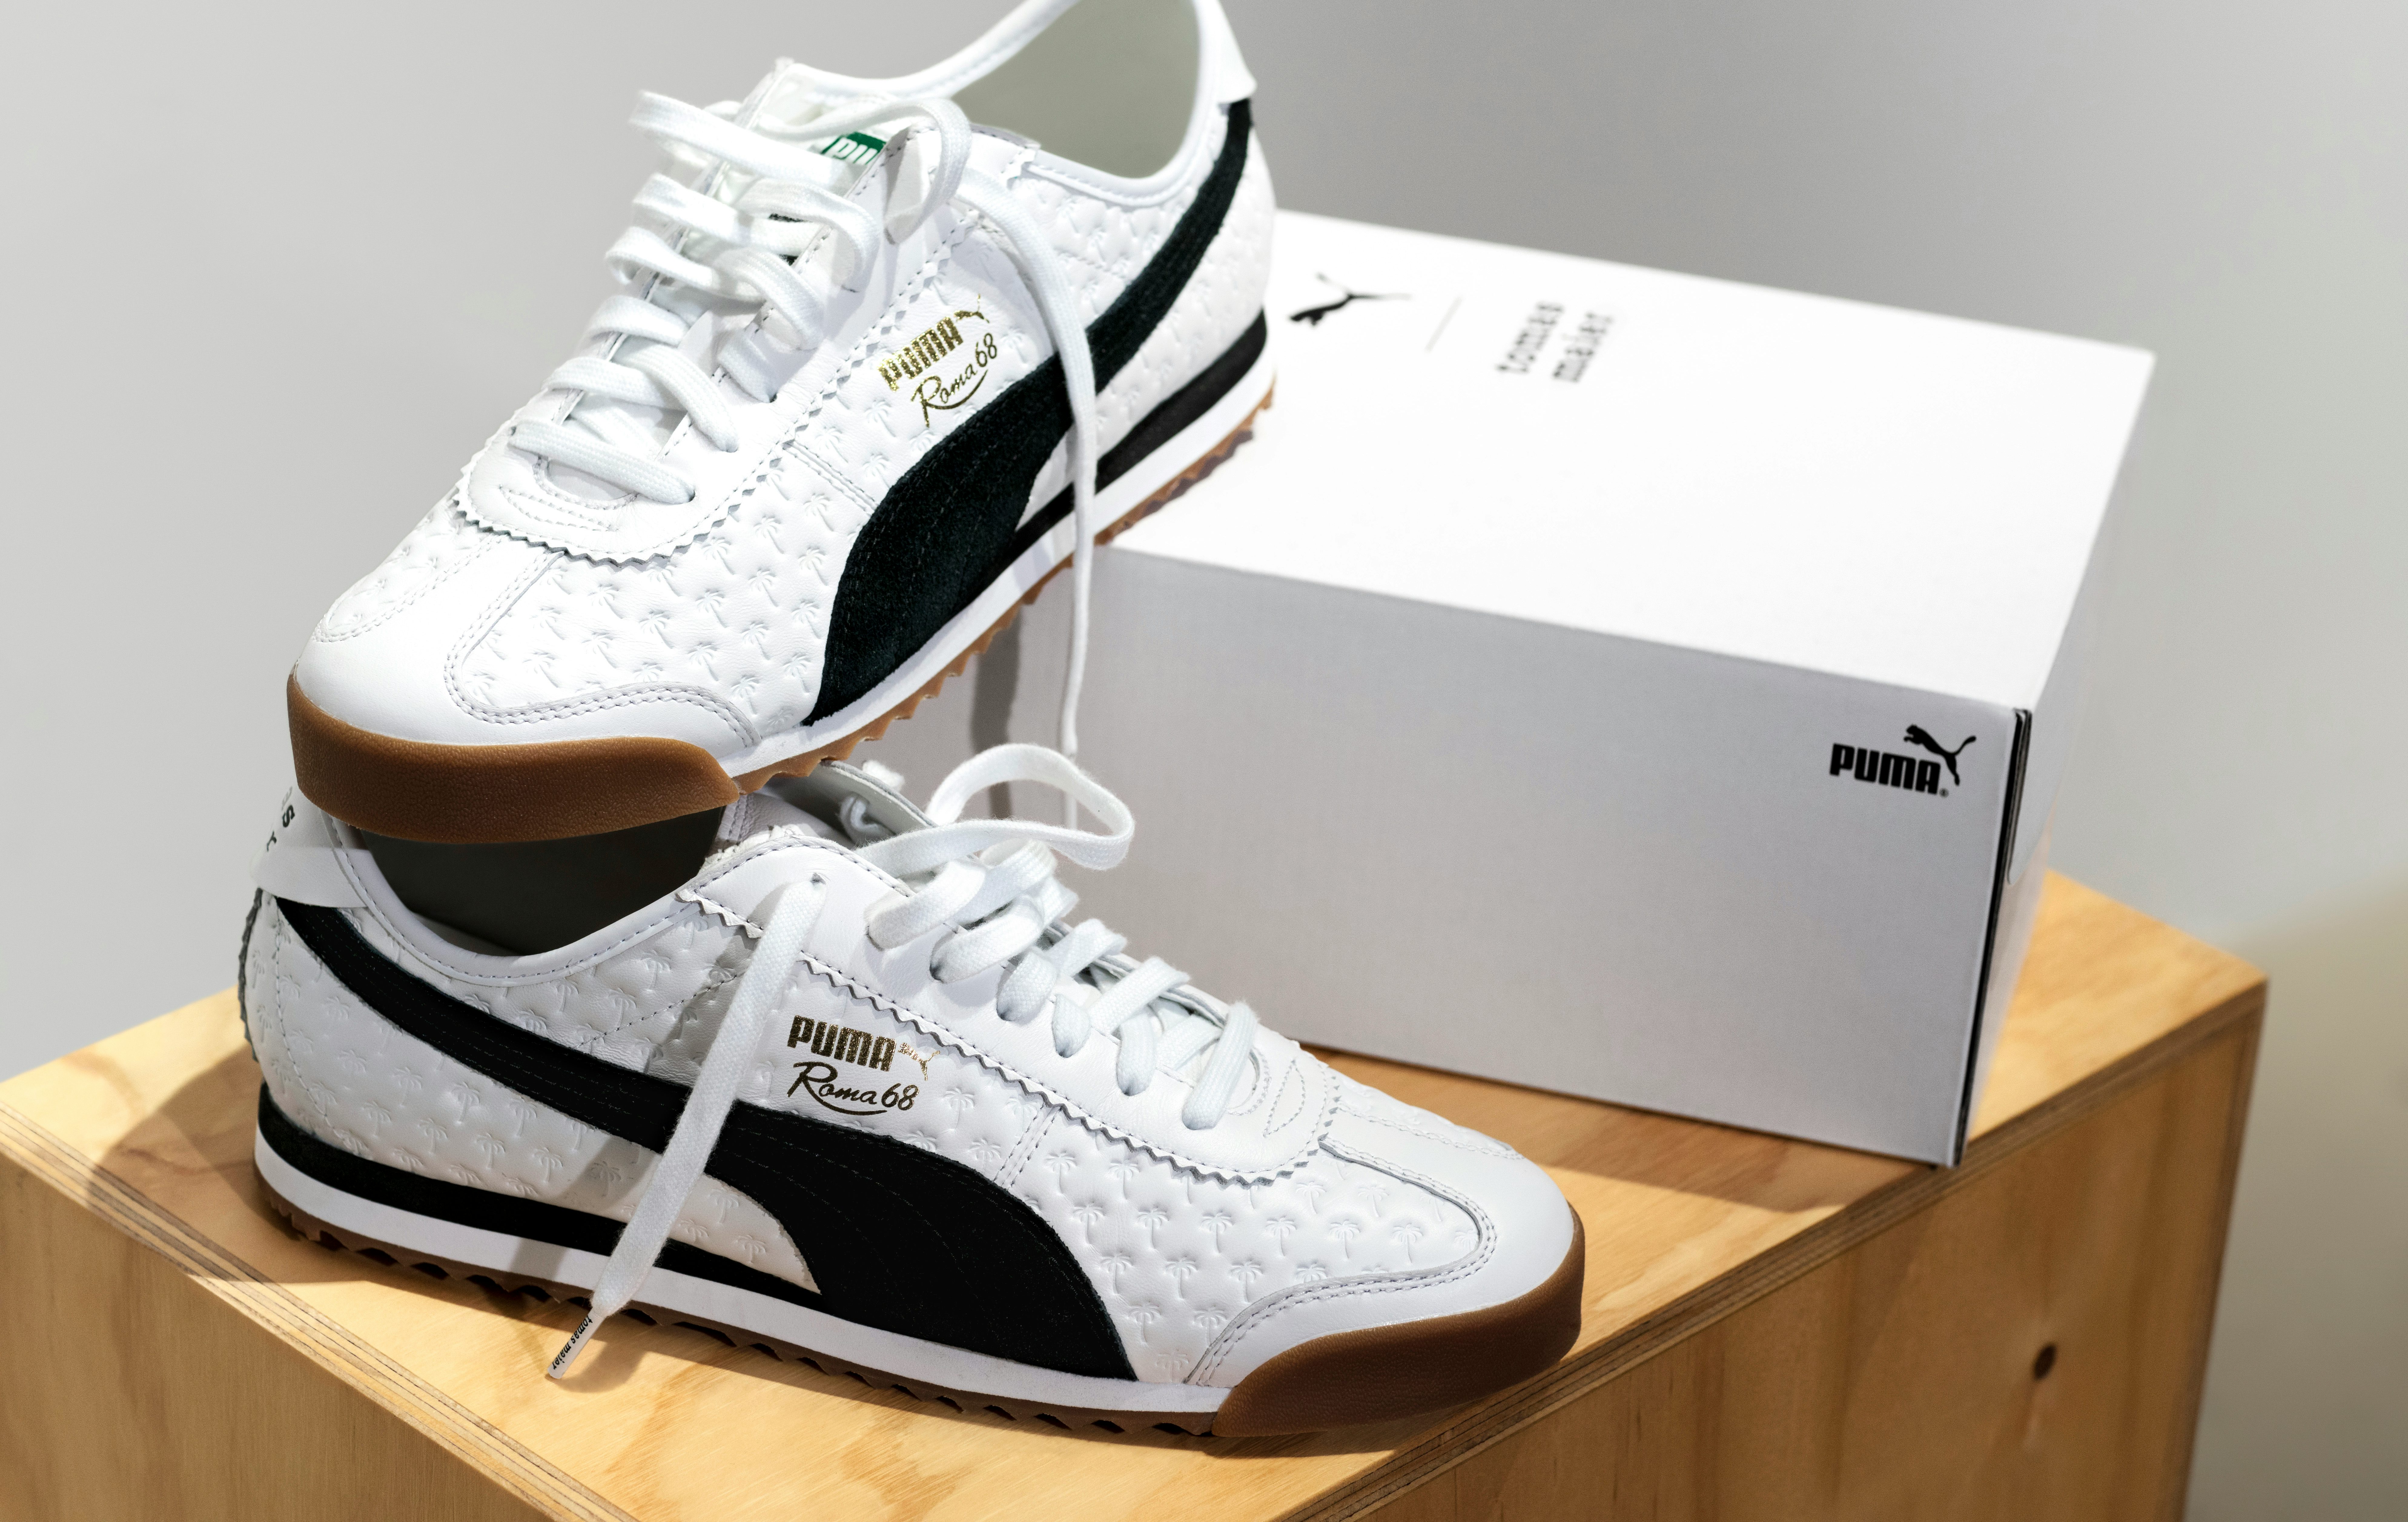 Puma Revives the Roma 1968 in Collaboration with Tomas Maier | News \u0026  Analysis, News Bites | BoF